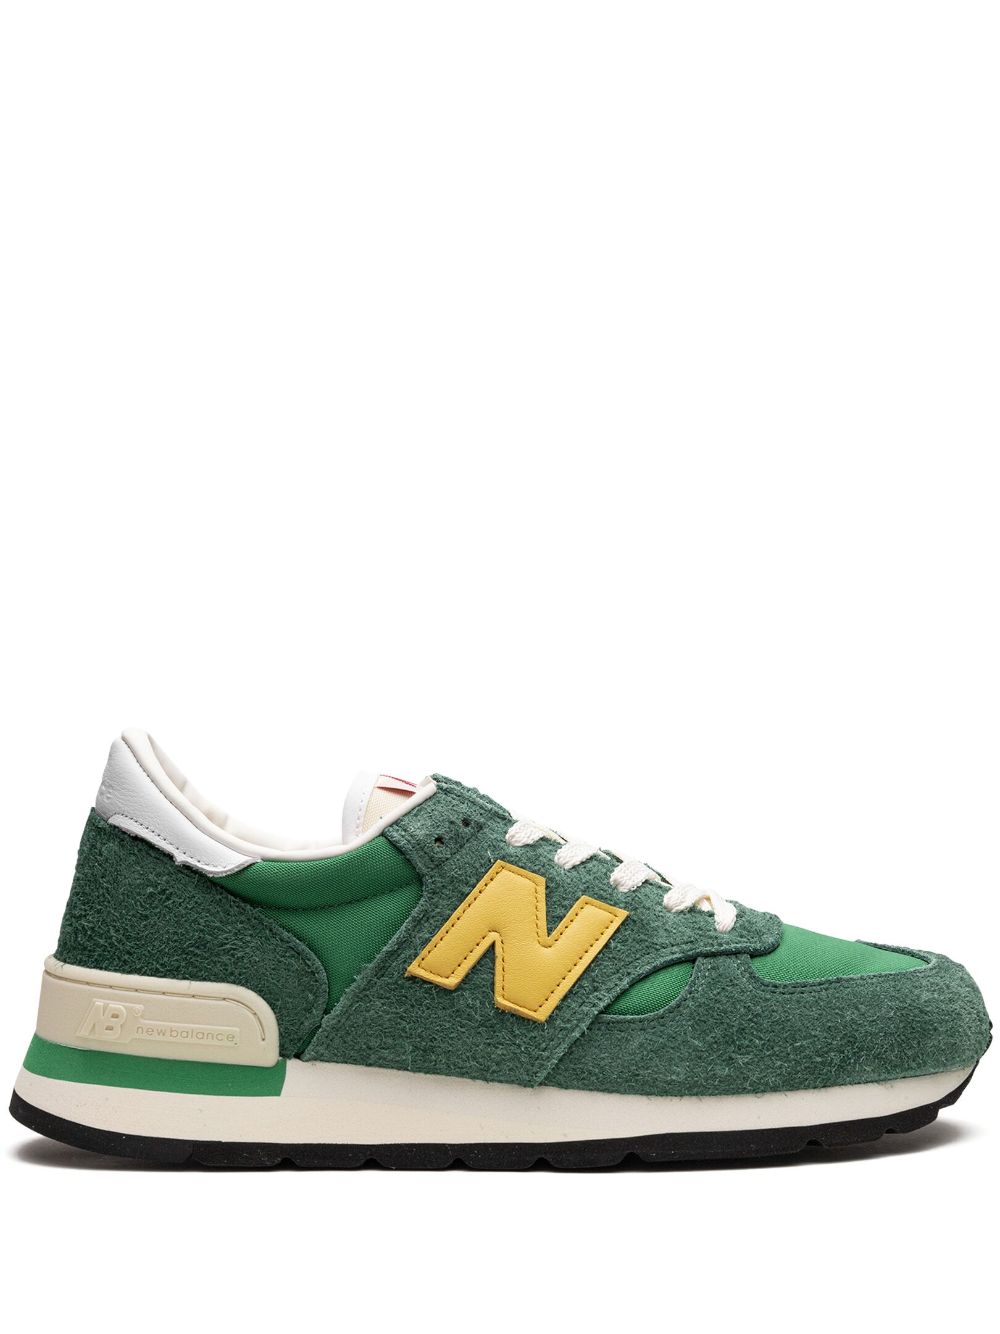 New Balance "990 V1 ""Made in USA"" sneakers" - Groen